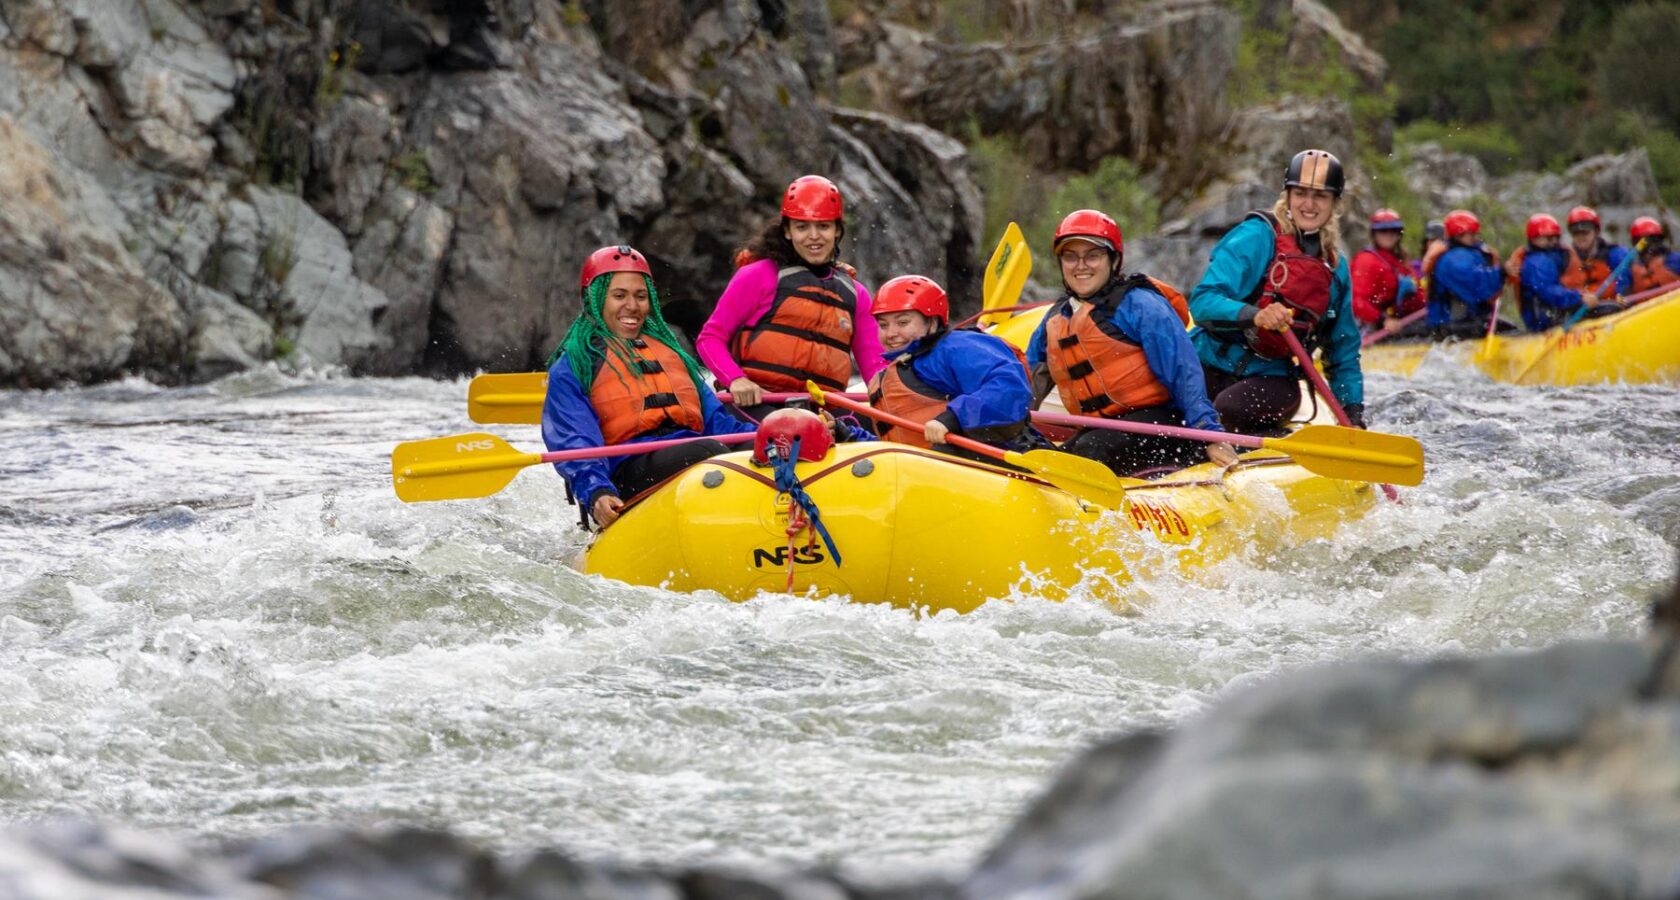 Rafting the South Fork of the American River